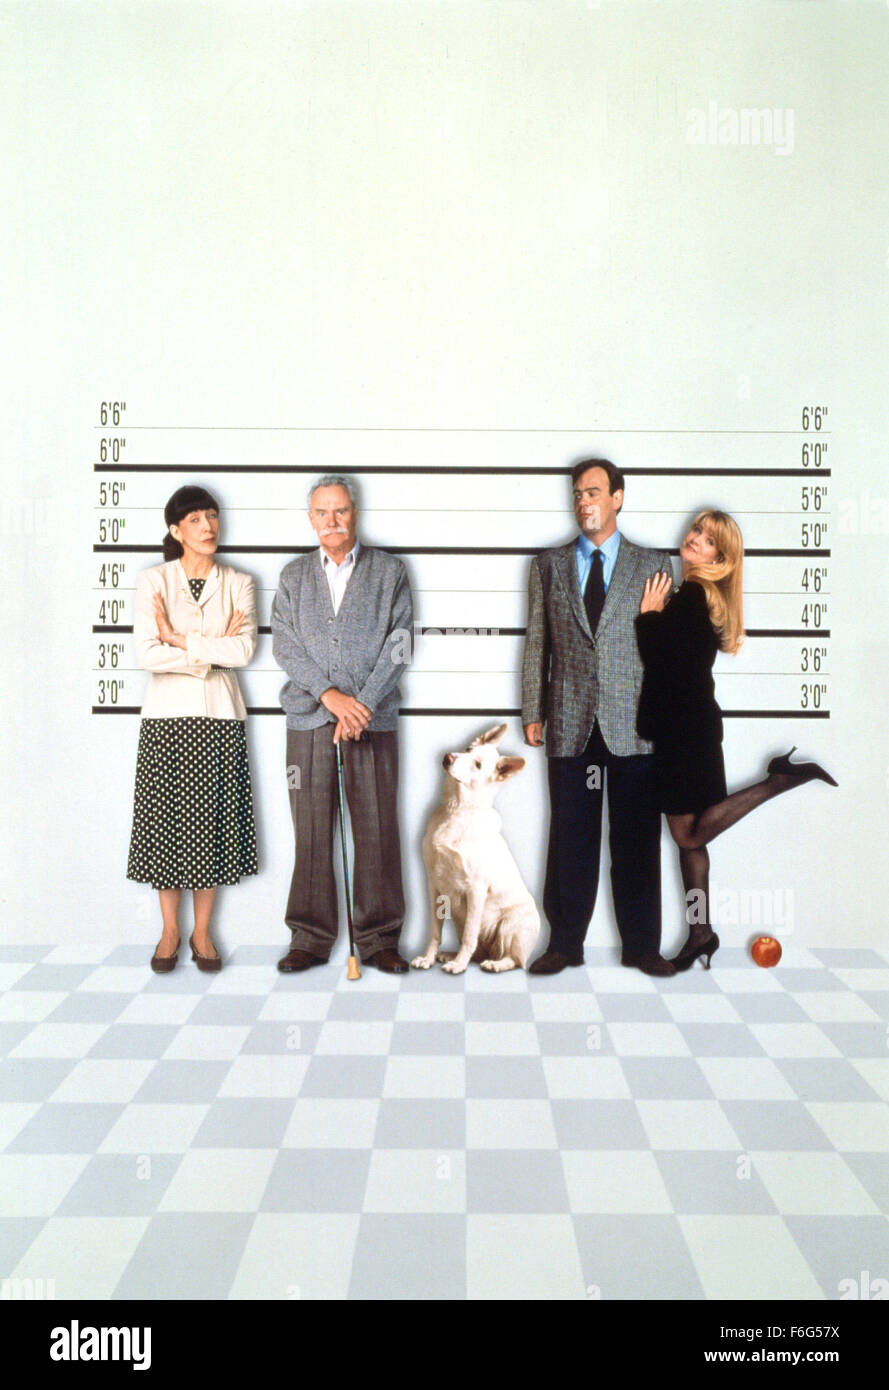 Apr 12, 1996; Hollywood, CA, USA; Key poster art featuring (left to right) LILY TOMLIN as Inga Muller, JACK LEMMON as Max Muller/Luger, DAN AYKROYD as Jack Lambert, and BONNIE HUNT as Dr. Gail Holland in the comedy ''Getting Away with Murder'' directed by Harvey Miller. Stock Photo